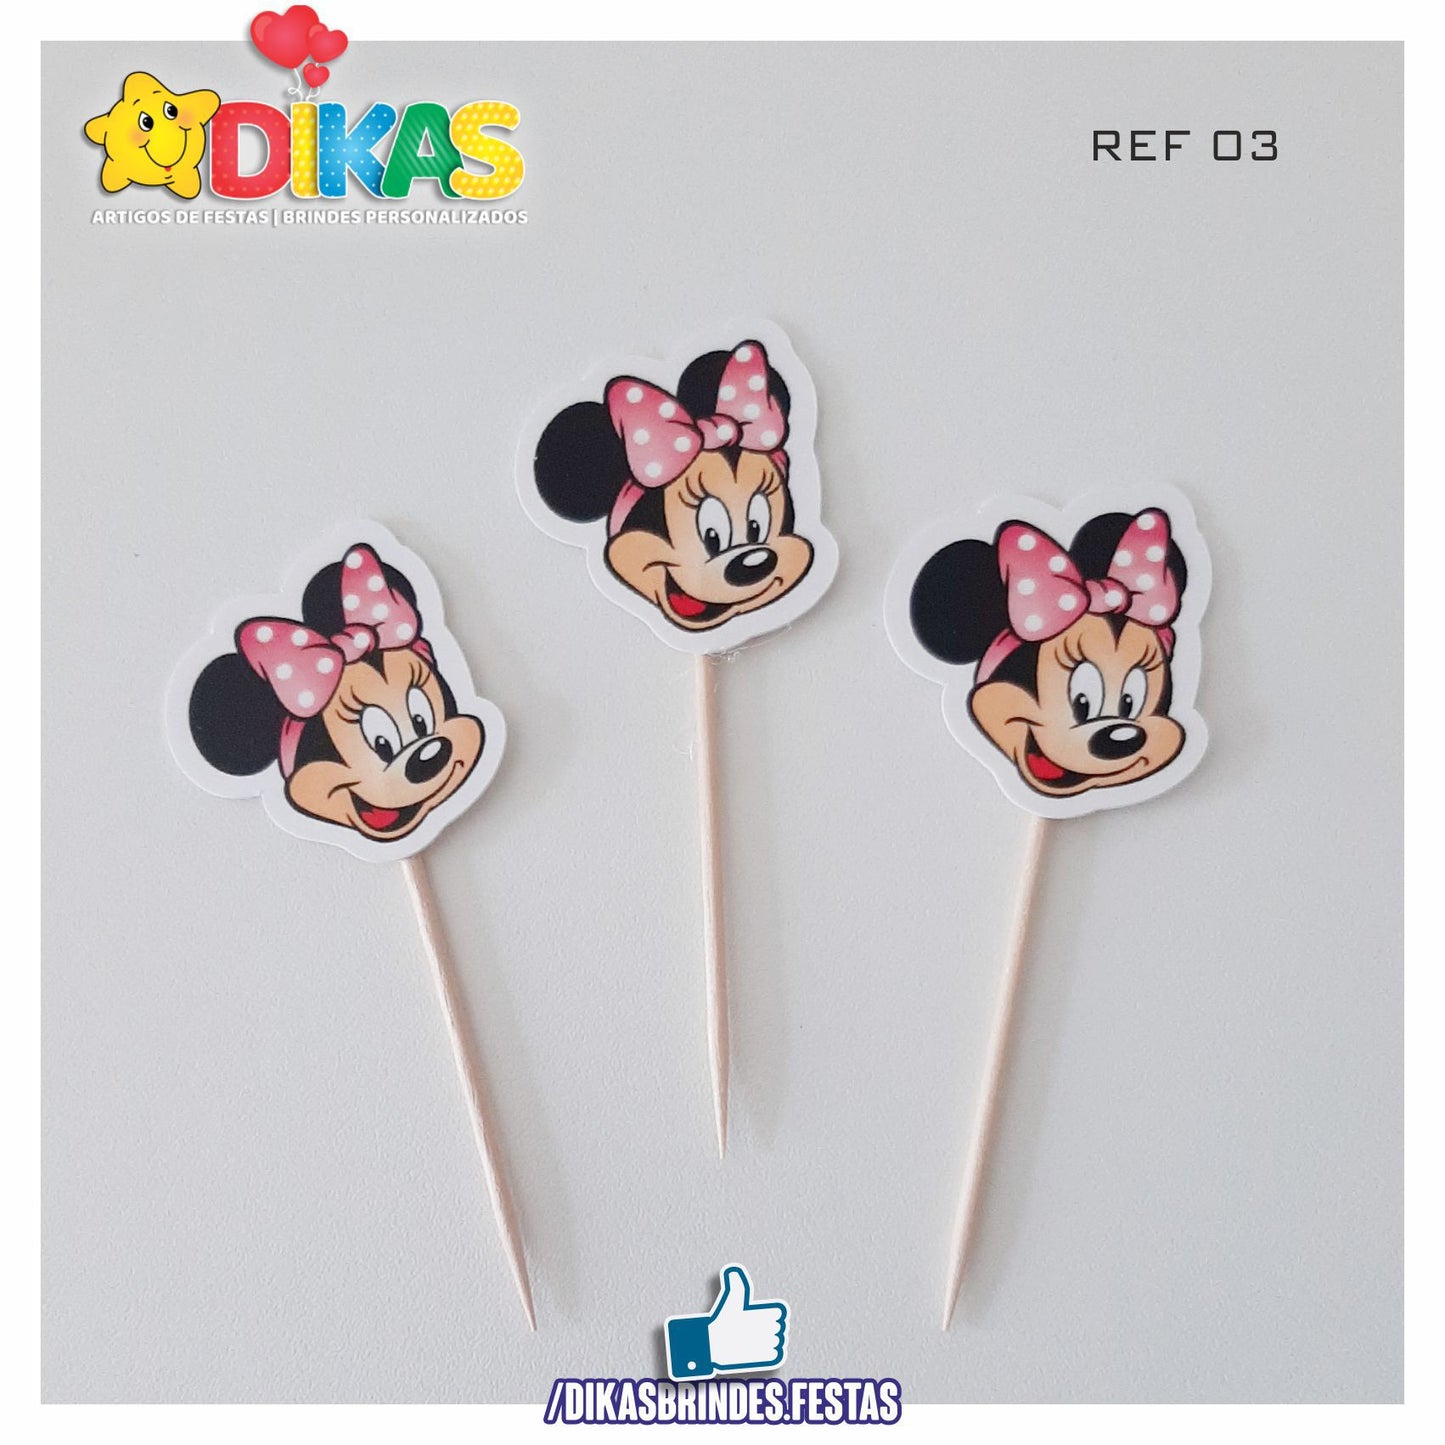 TOPPERS SIMPLES - MINNIE ROSA